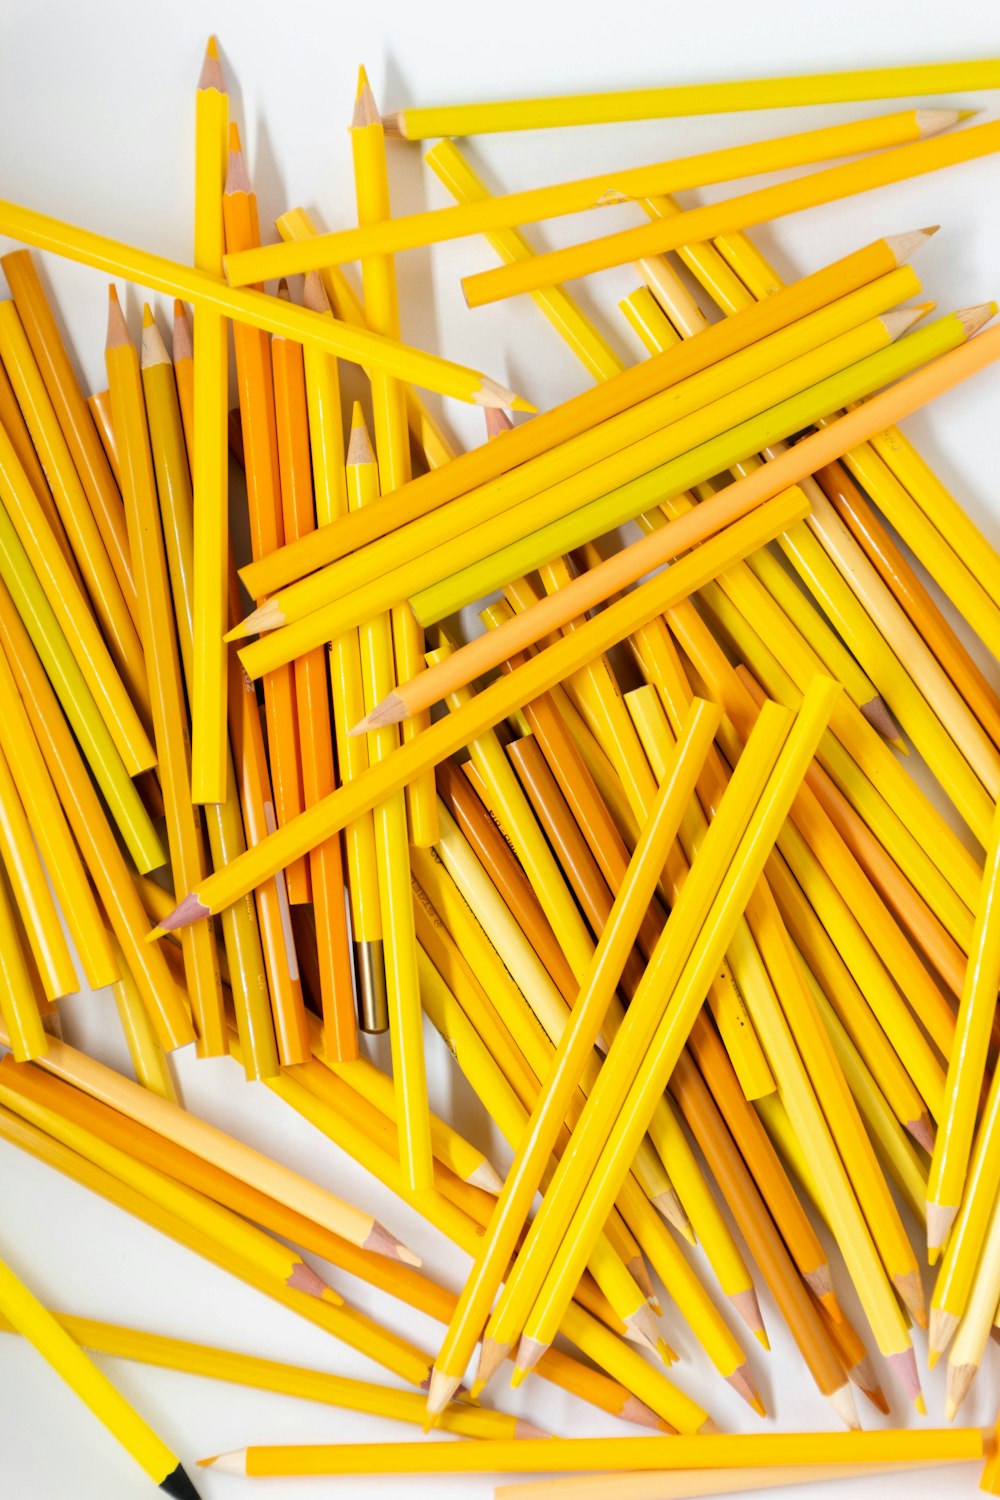 yellow pencils on white surface